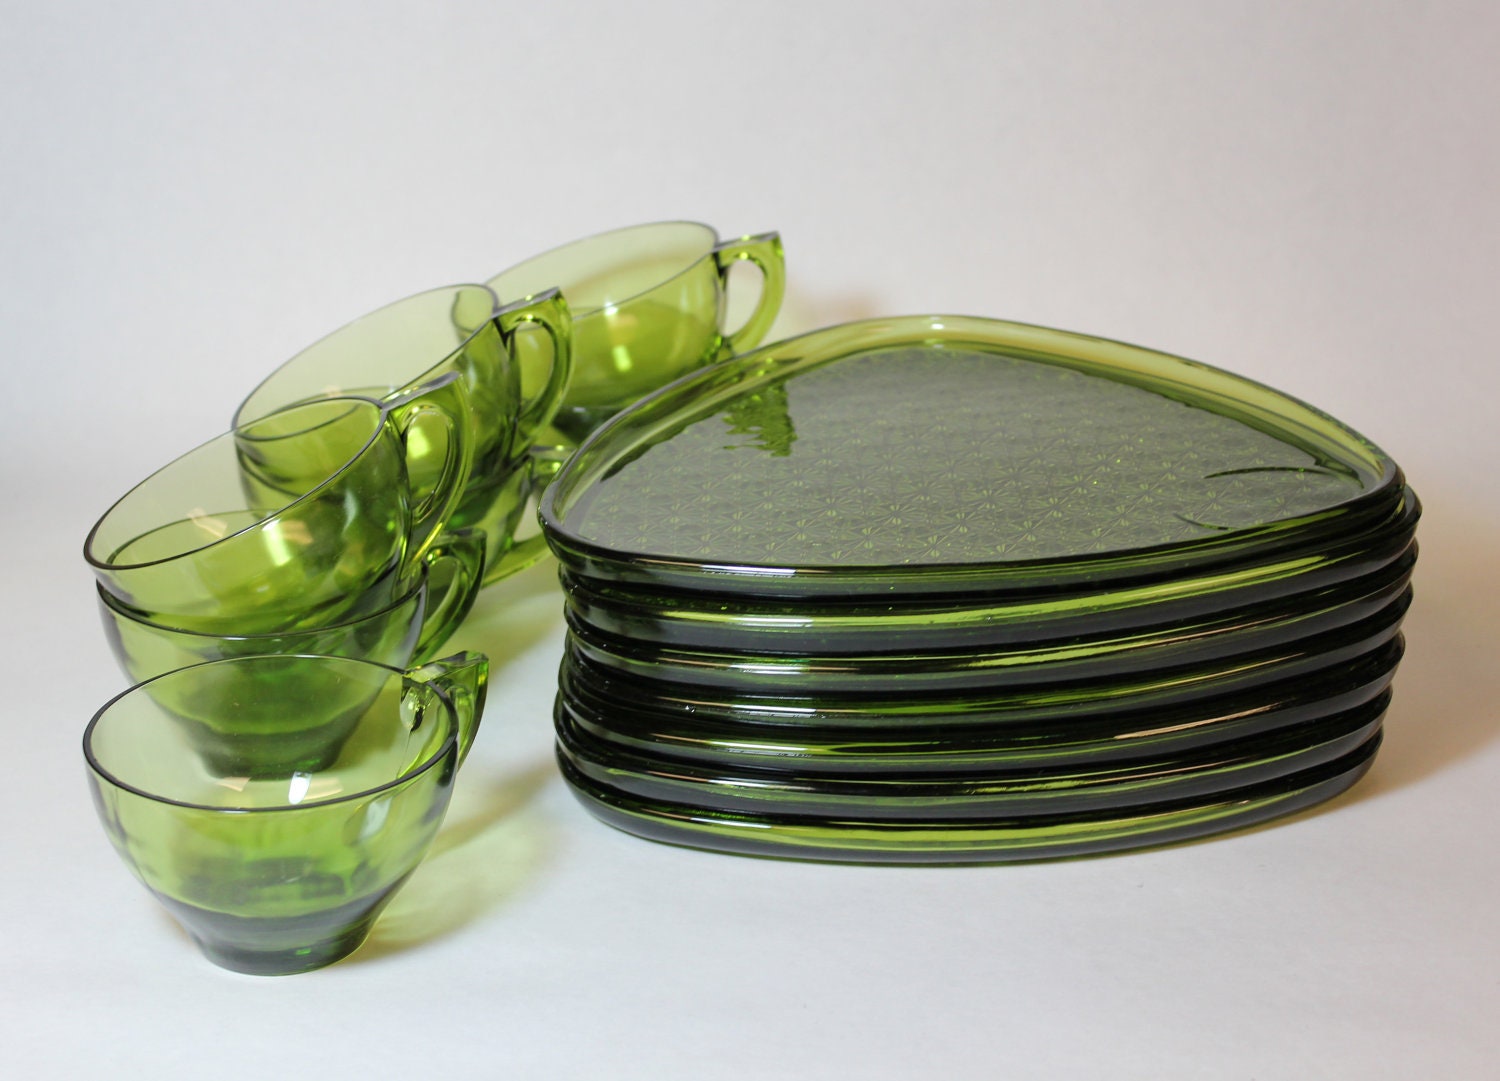 GLASS TEA SET - Mid century, retro triangle snack plates and tea cups in green glass x7 (c.1950s-60s)